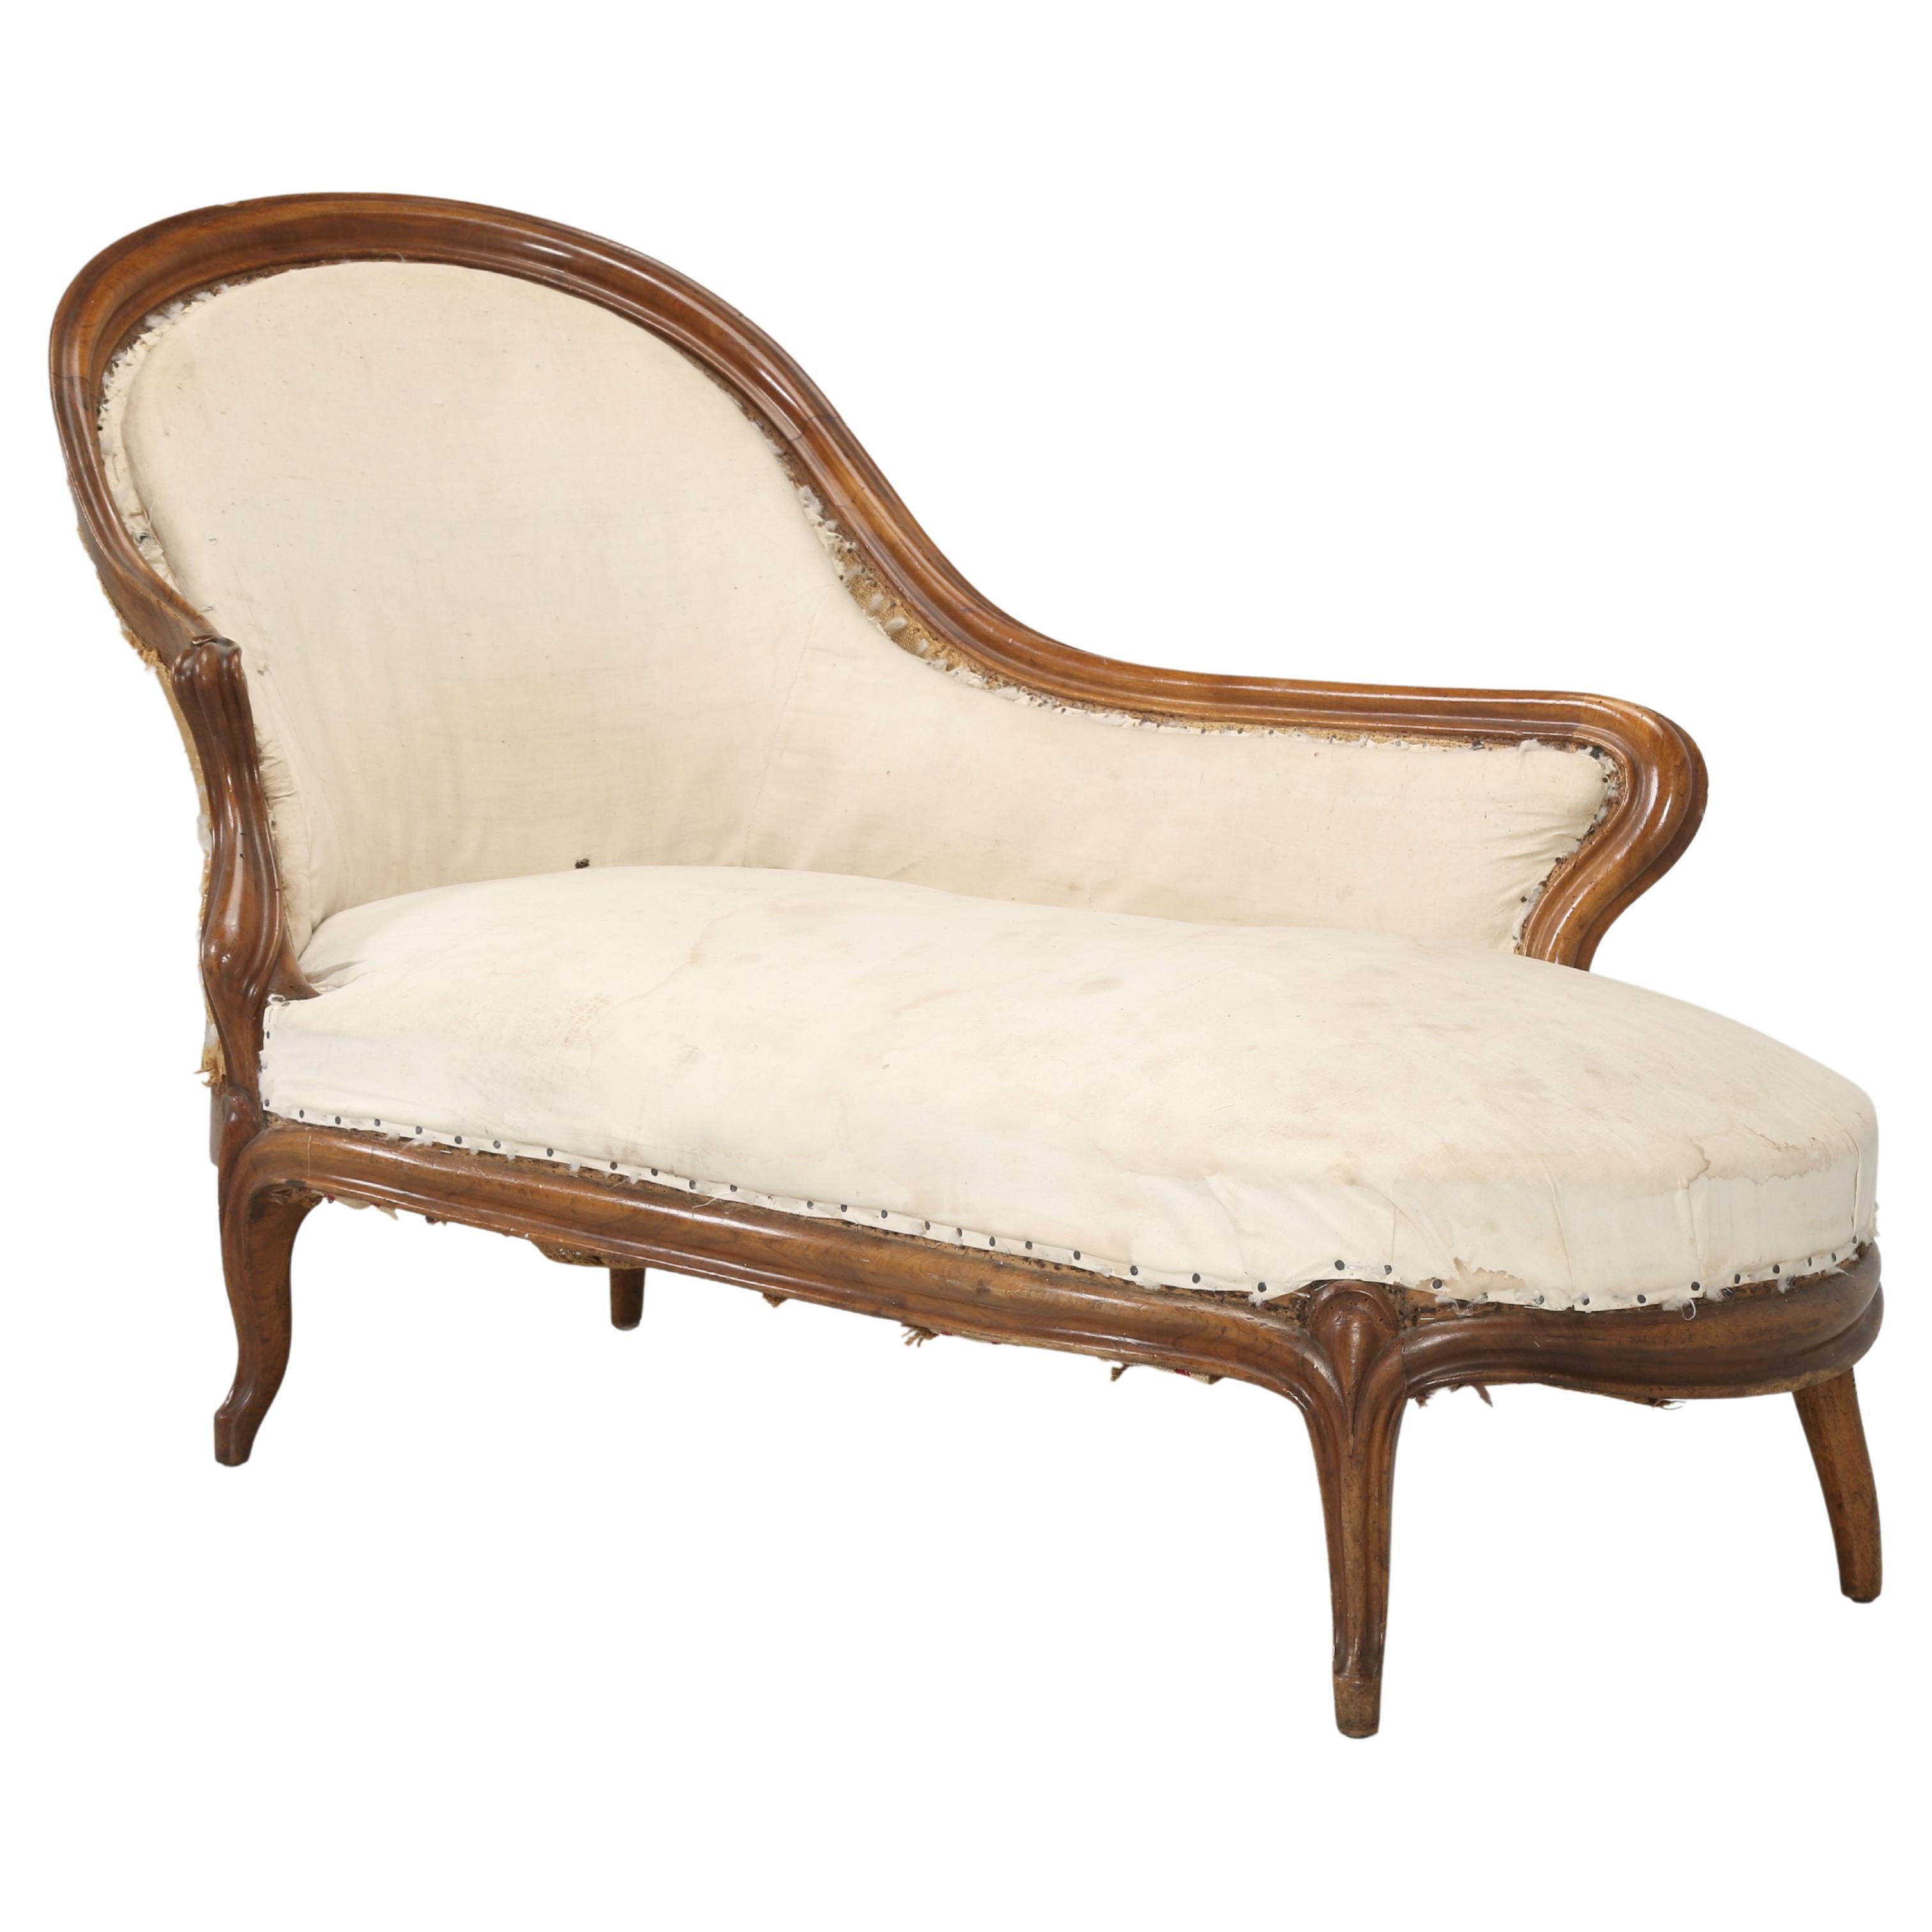 Antique French Chaise Lounge in Figured Walnut in the M�éridienne Style, c1860's